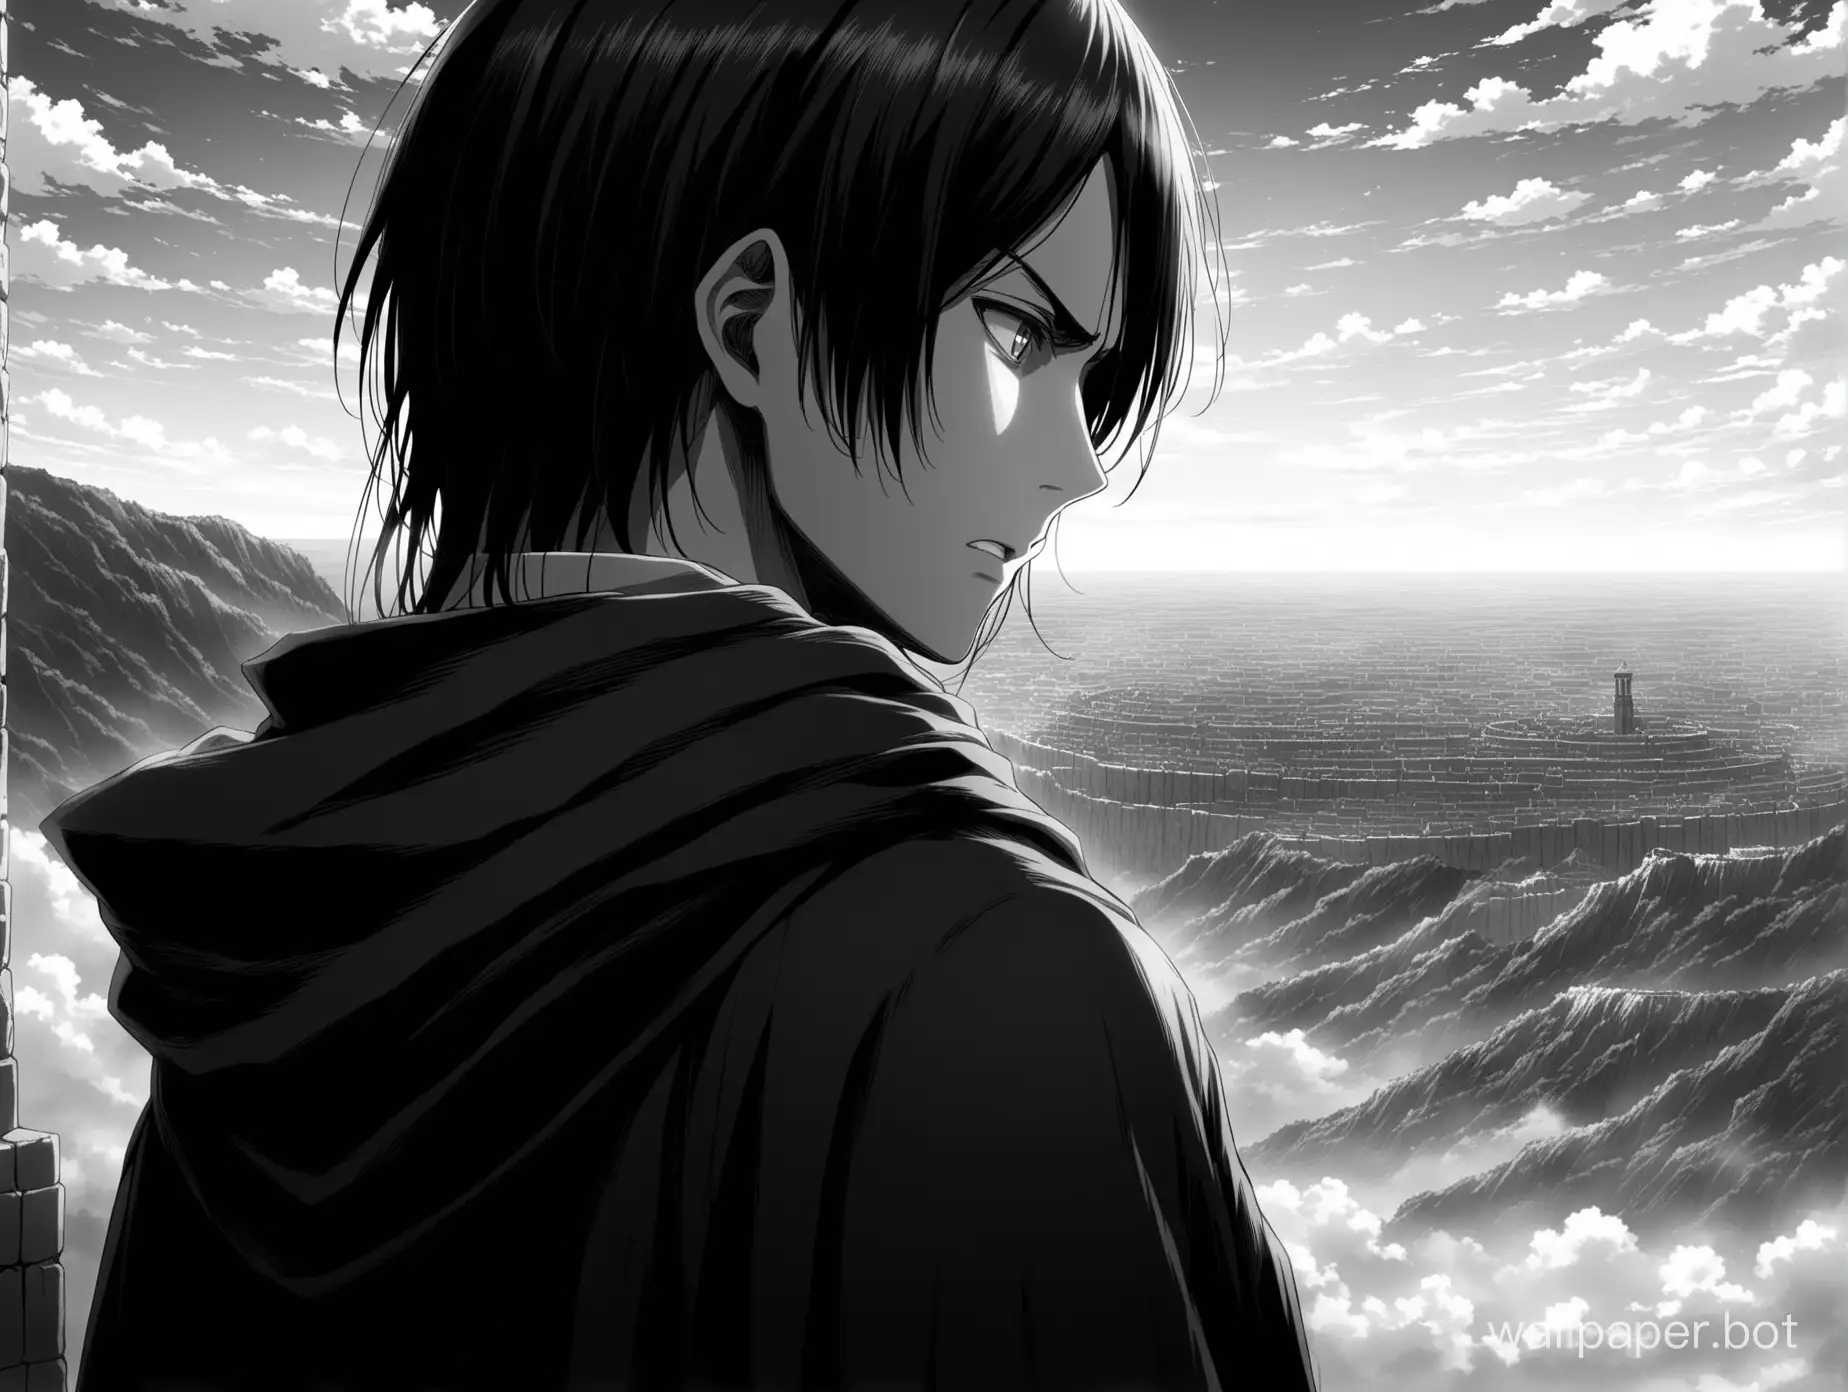 Brooding-Eren-Yeager-Contemplates-Beyond-in-Monochrome-Art